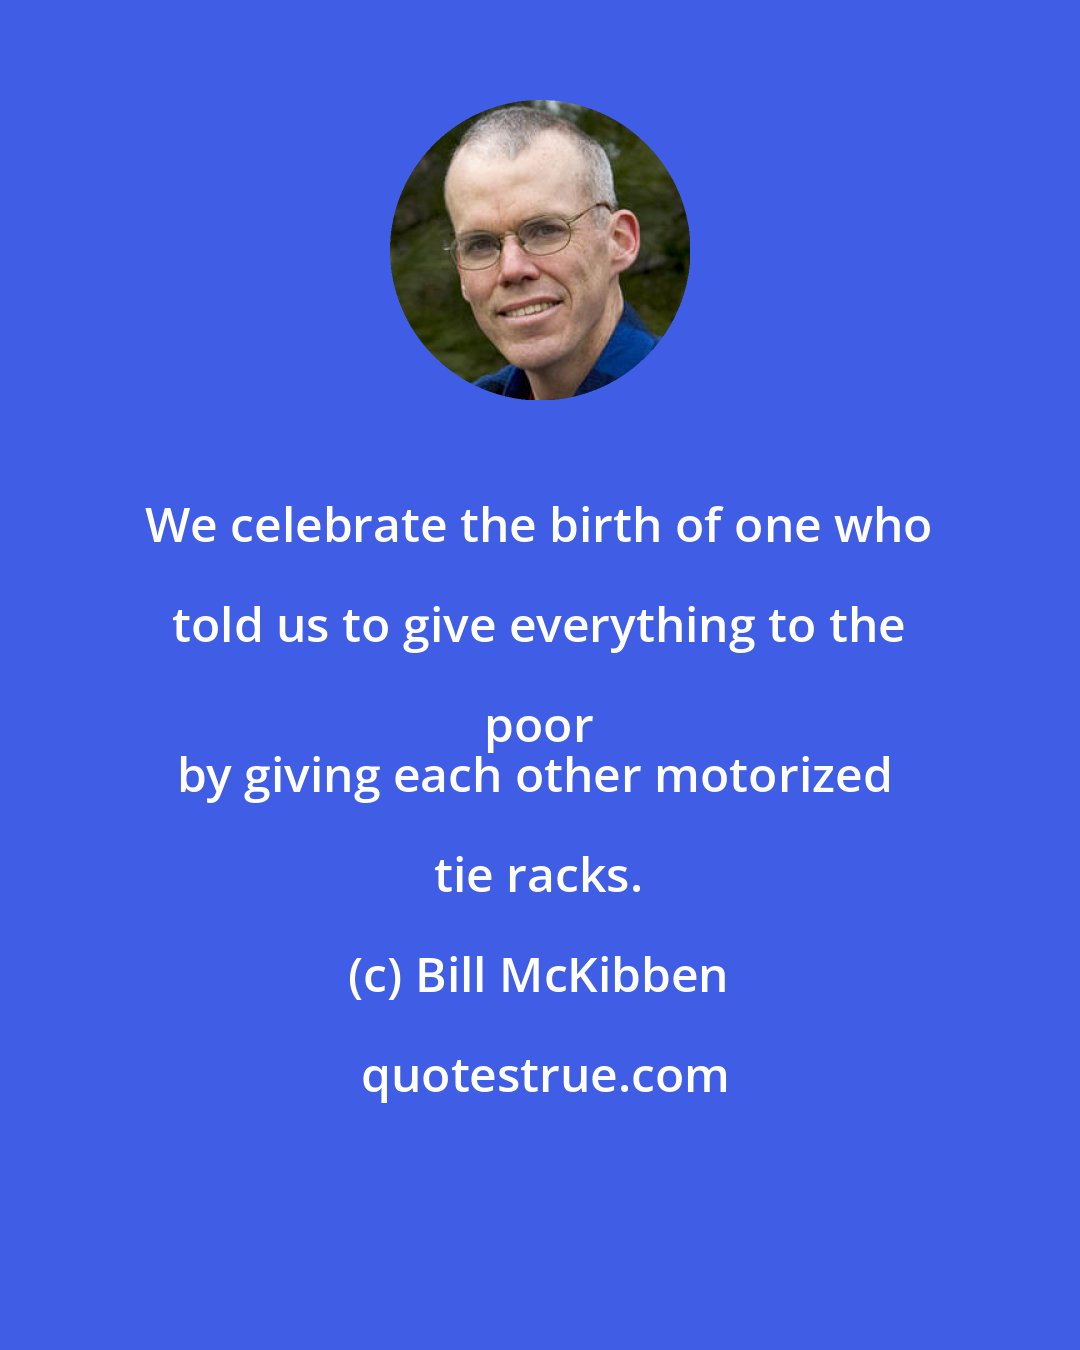 Bill McKibben: We celebrate the birth of one who told us to give everything to the poor 
by giving each other motorized tie racks.